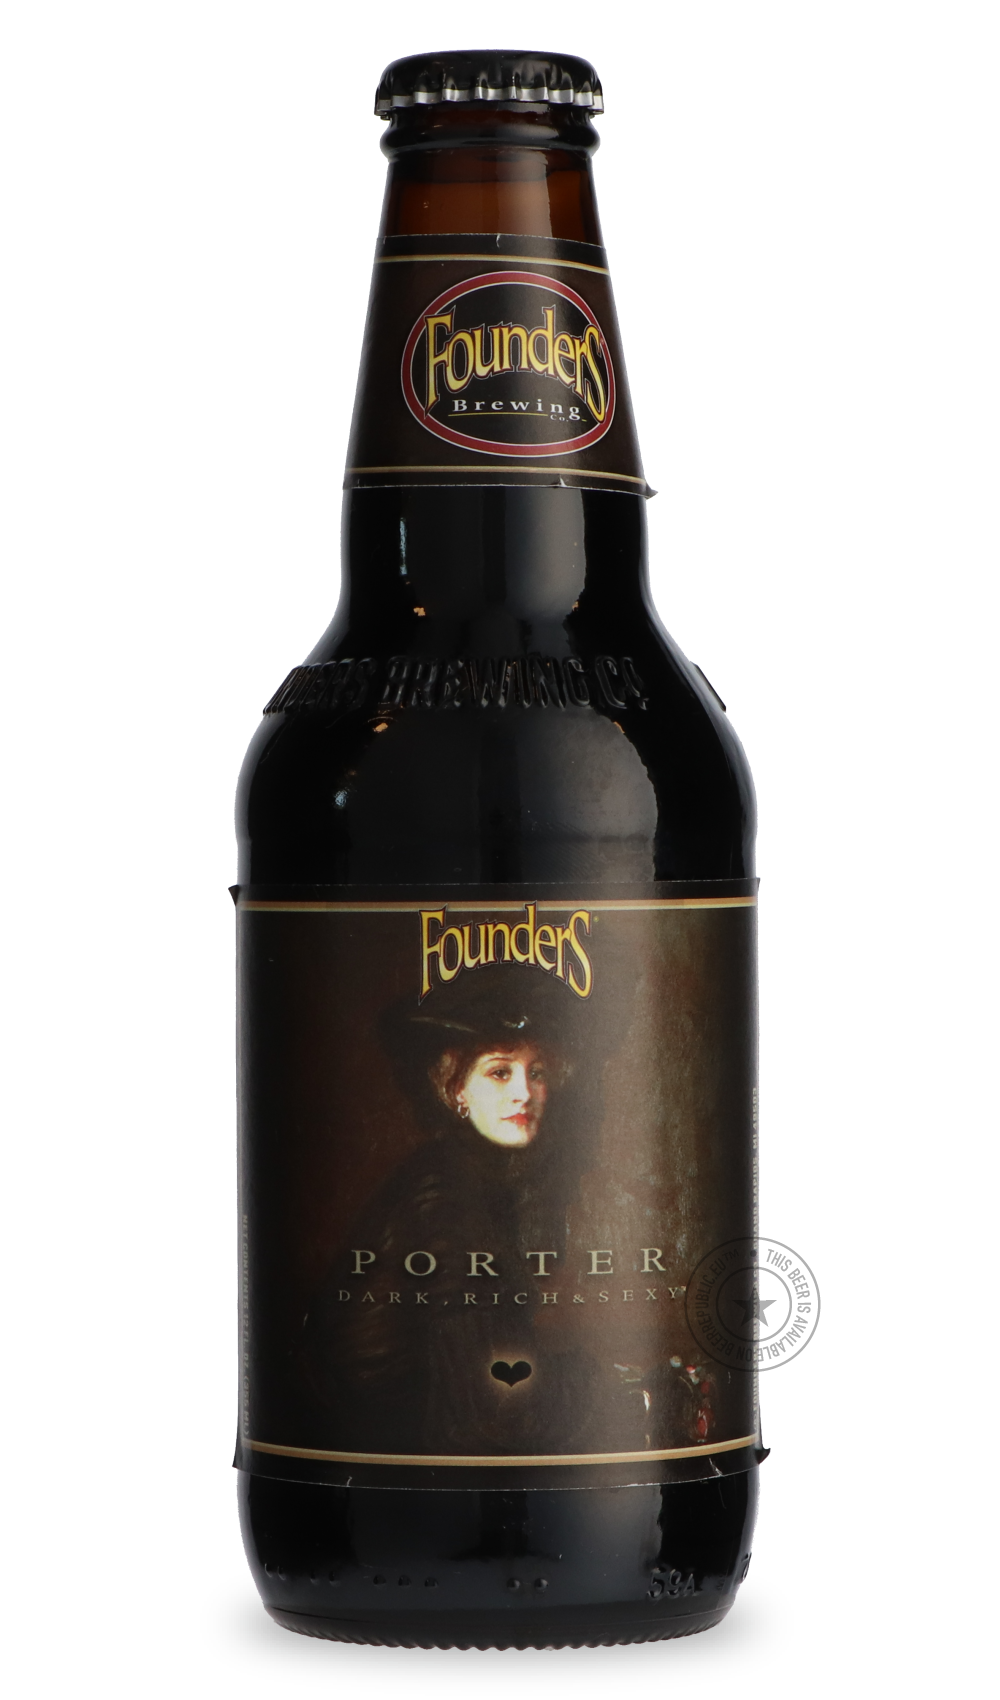 -Founders- Founders Porter-Stout & Porter- Only @ Beer Republic - The best online beer store for American & Canadian craft beer - Buy beer online from the USA and Canada - Bier online kopen - Amerikaans bier kopen - Craft beer store - Craft beer kopen - Amerikanisch bier kaufen - Bier online kaufen - Acheter biere online - IPA - Stout - Porter - New England IPA - Hazy IPA - Imperial Stout - Barrel Aged - Barrel Aged Imperial Stout - Brown - Dark beer - Blond - Blonde - Pilsner - Lager - Wheat - Weizen - Amb